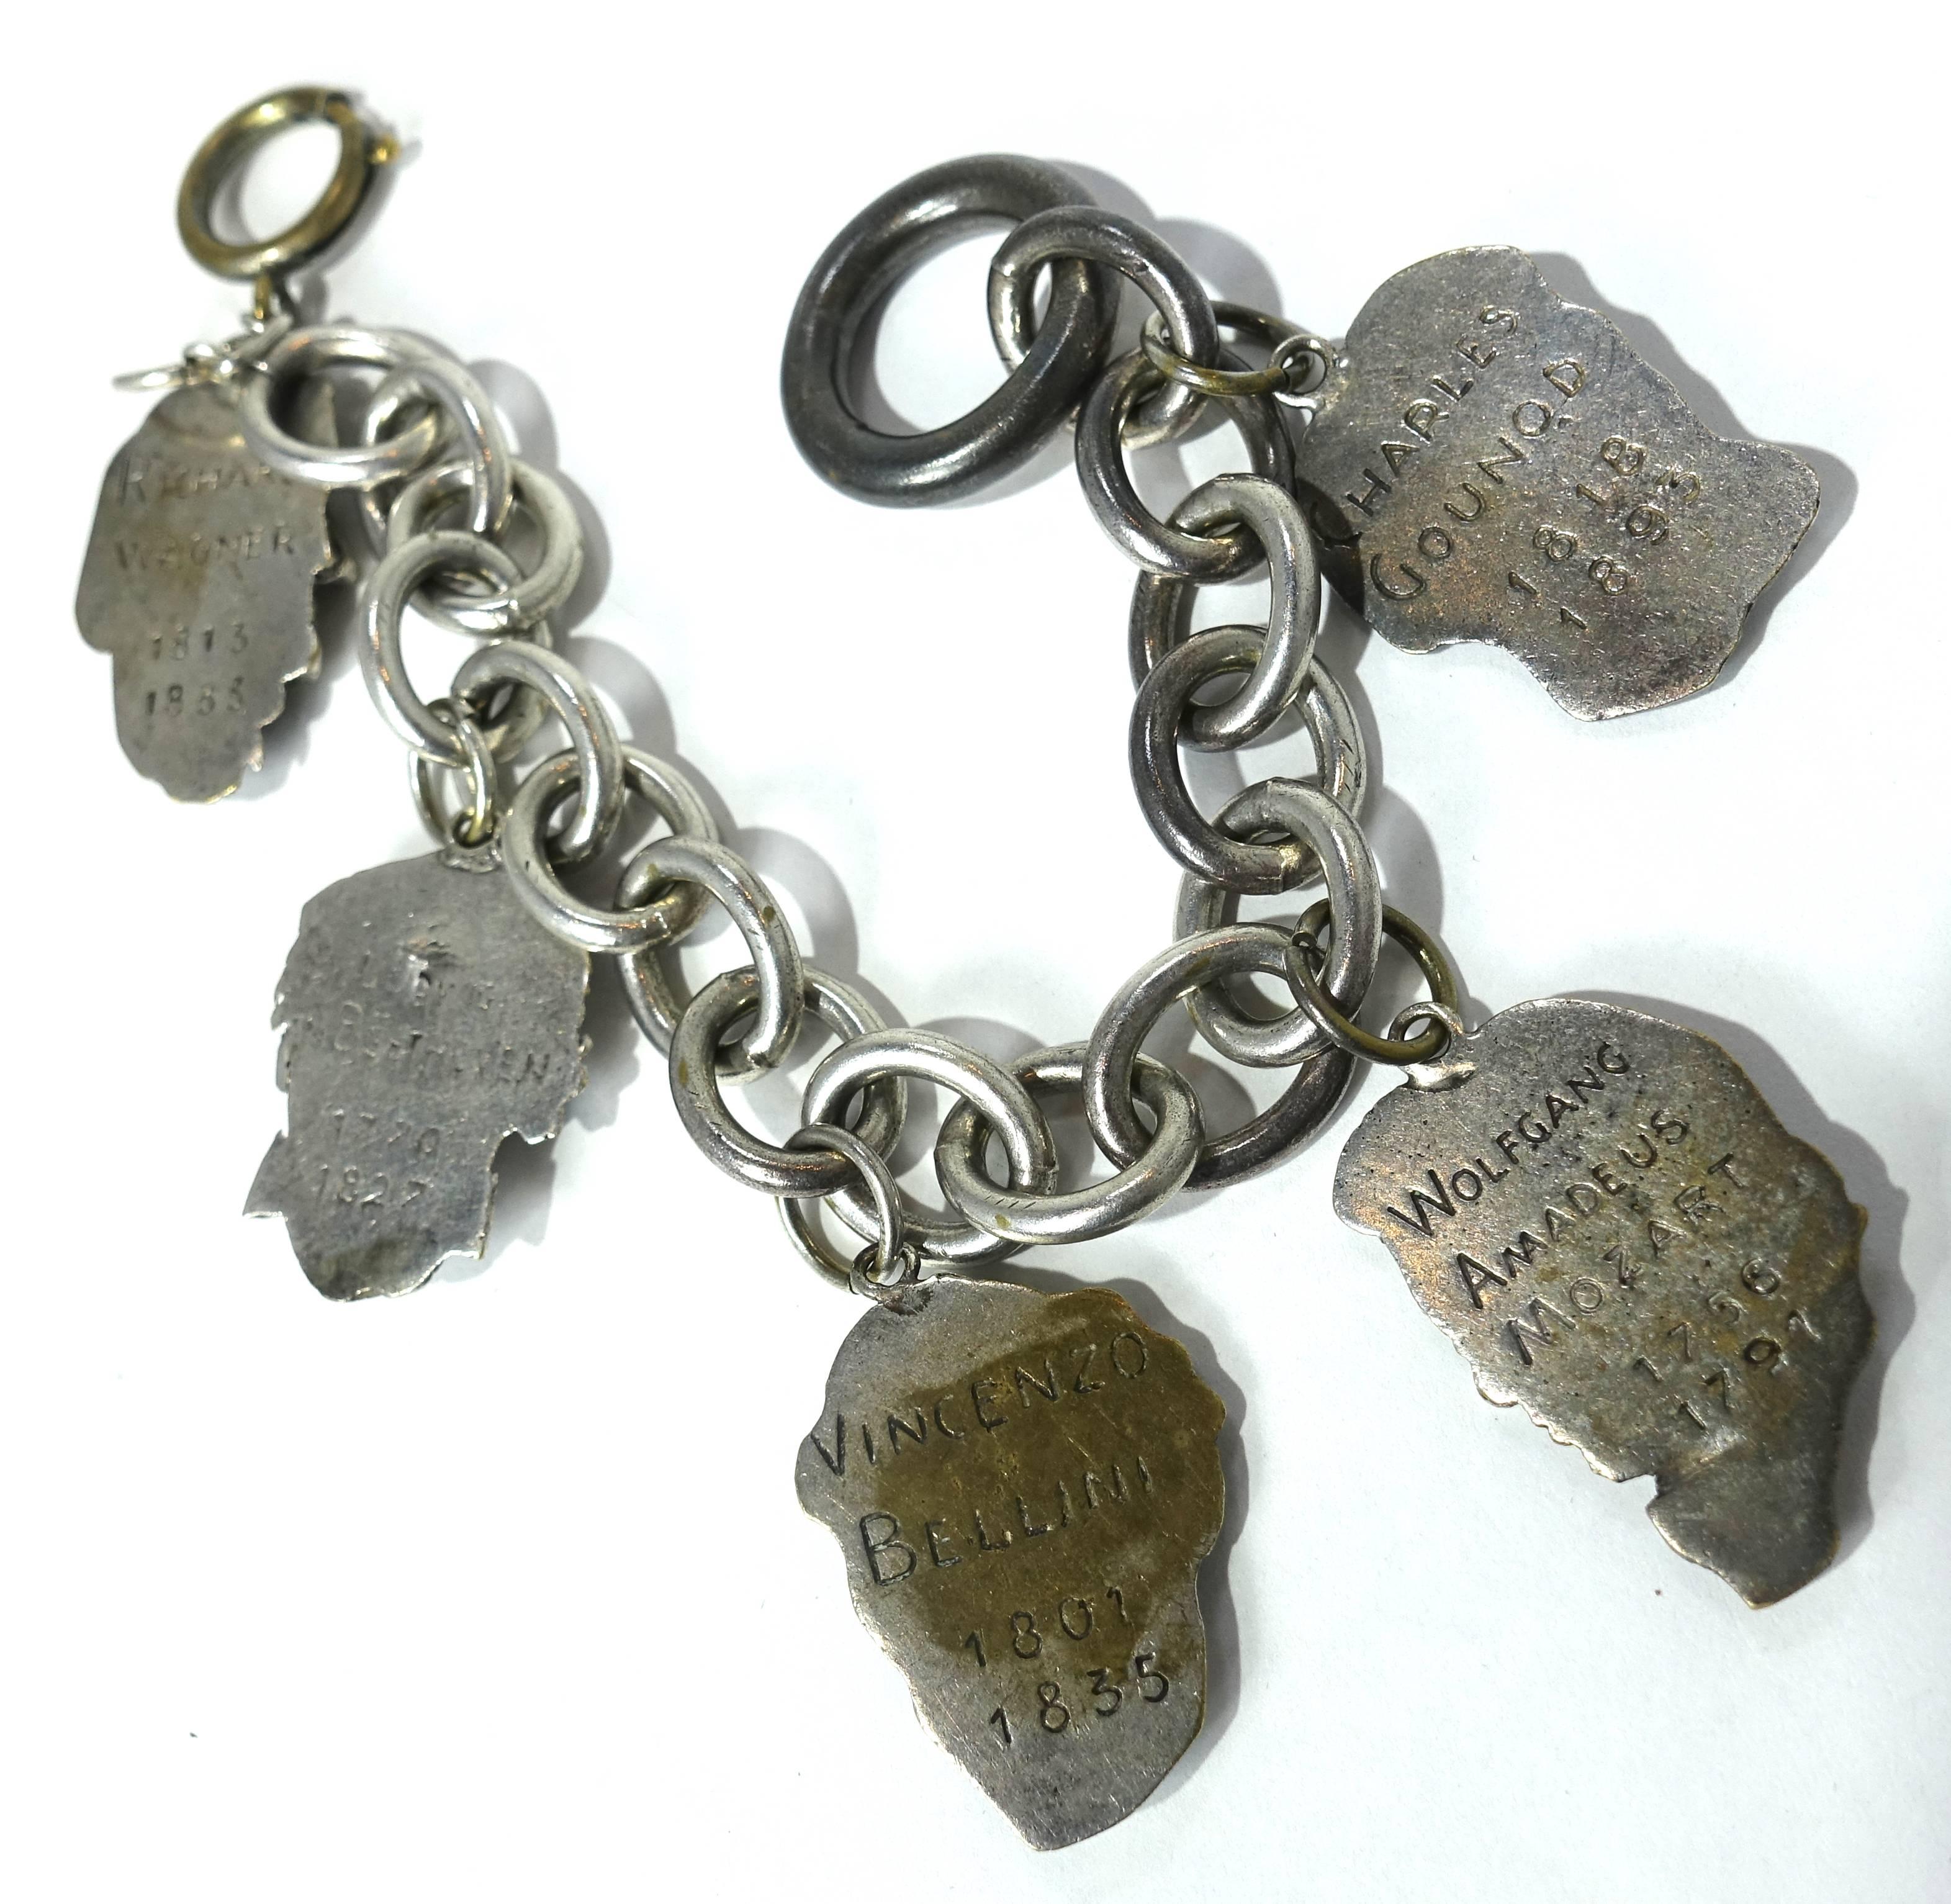 Famous Classical Composers Vintage Charm Bracelet In Excellent Condition For Sale In New York, NY